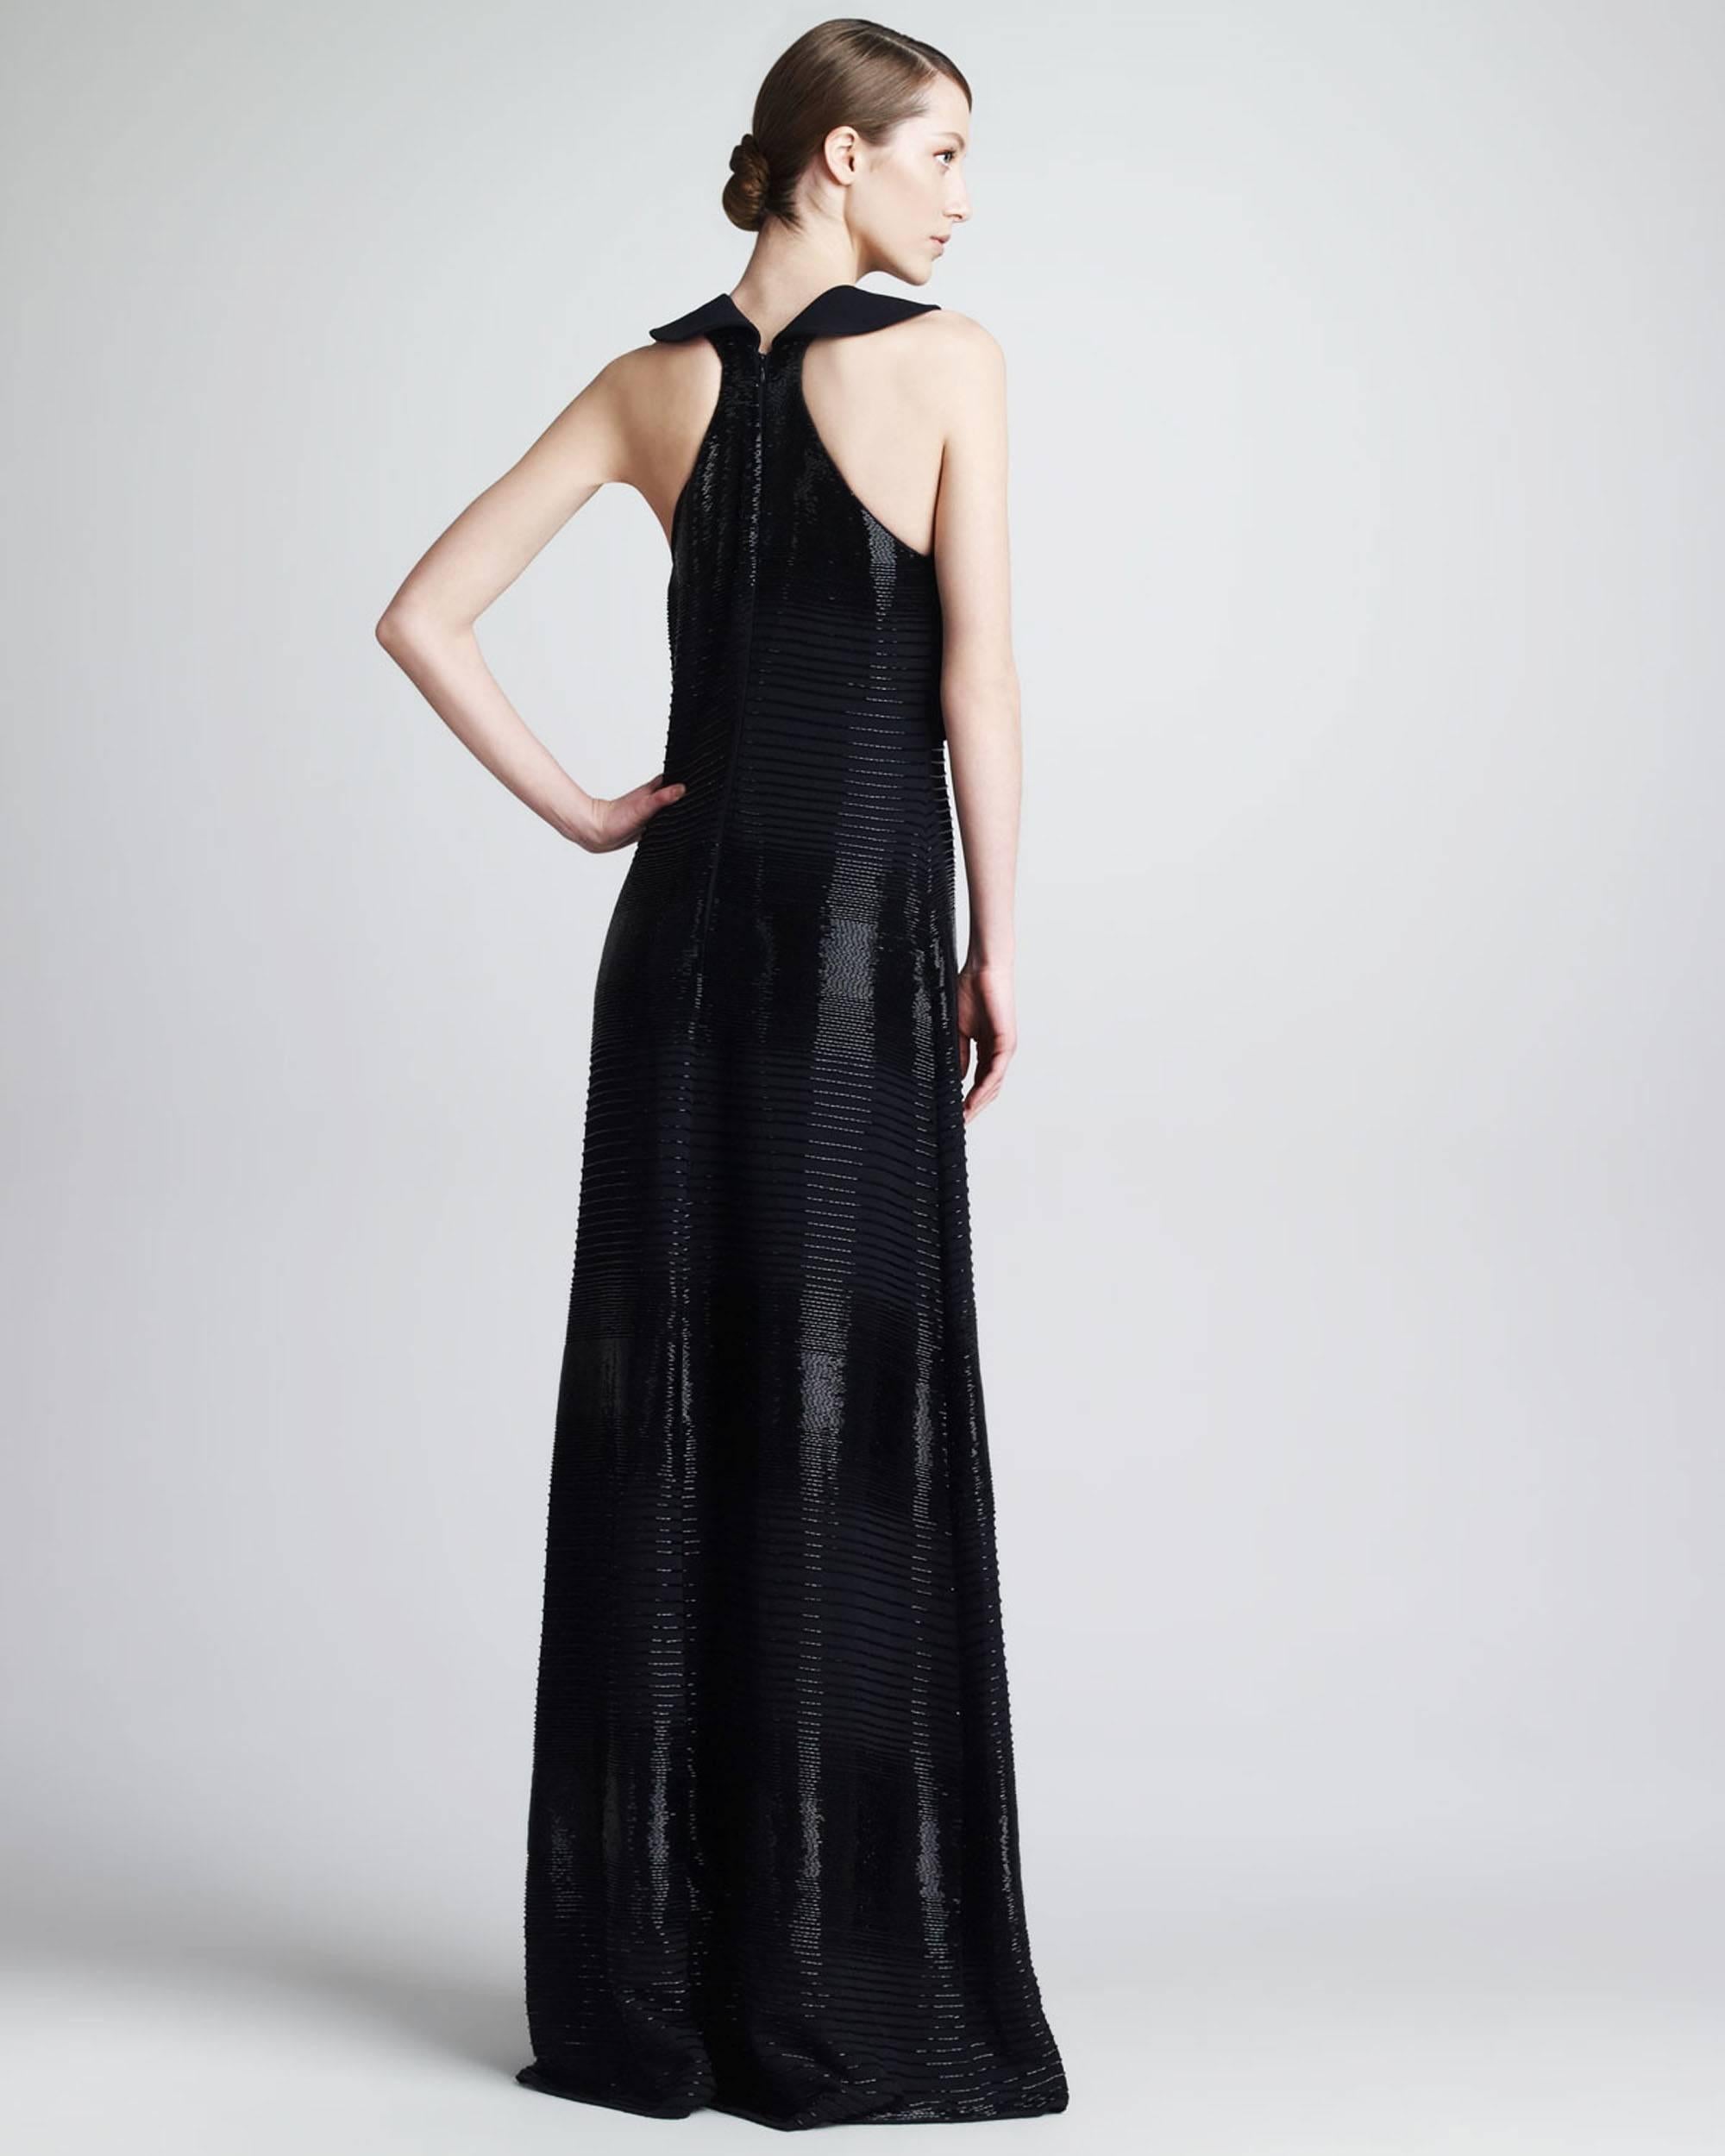 New ETRO Runway Fully Beaded Black Gown 44 1